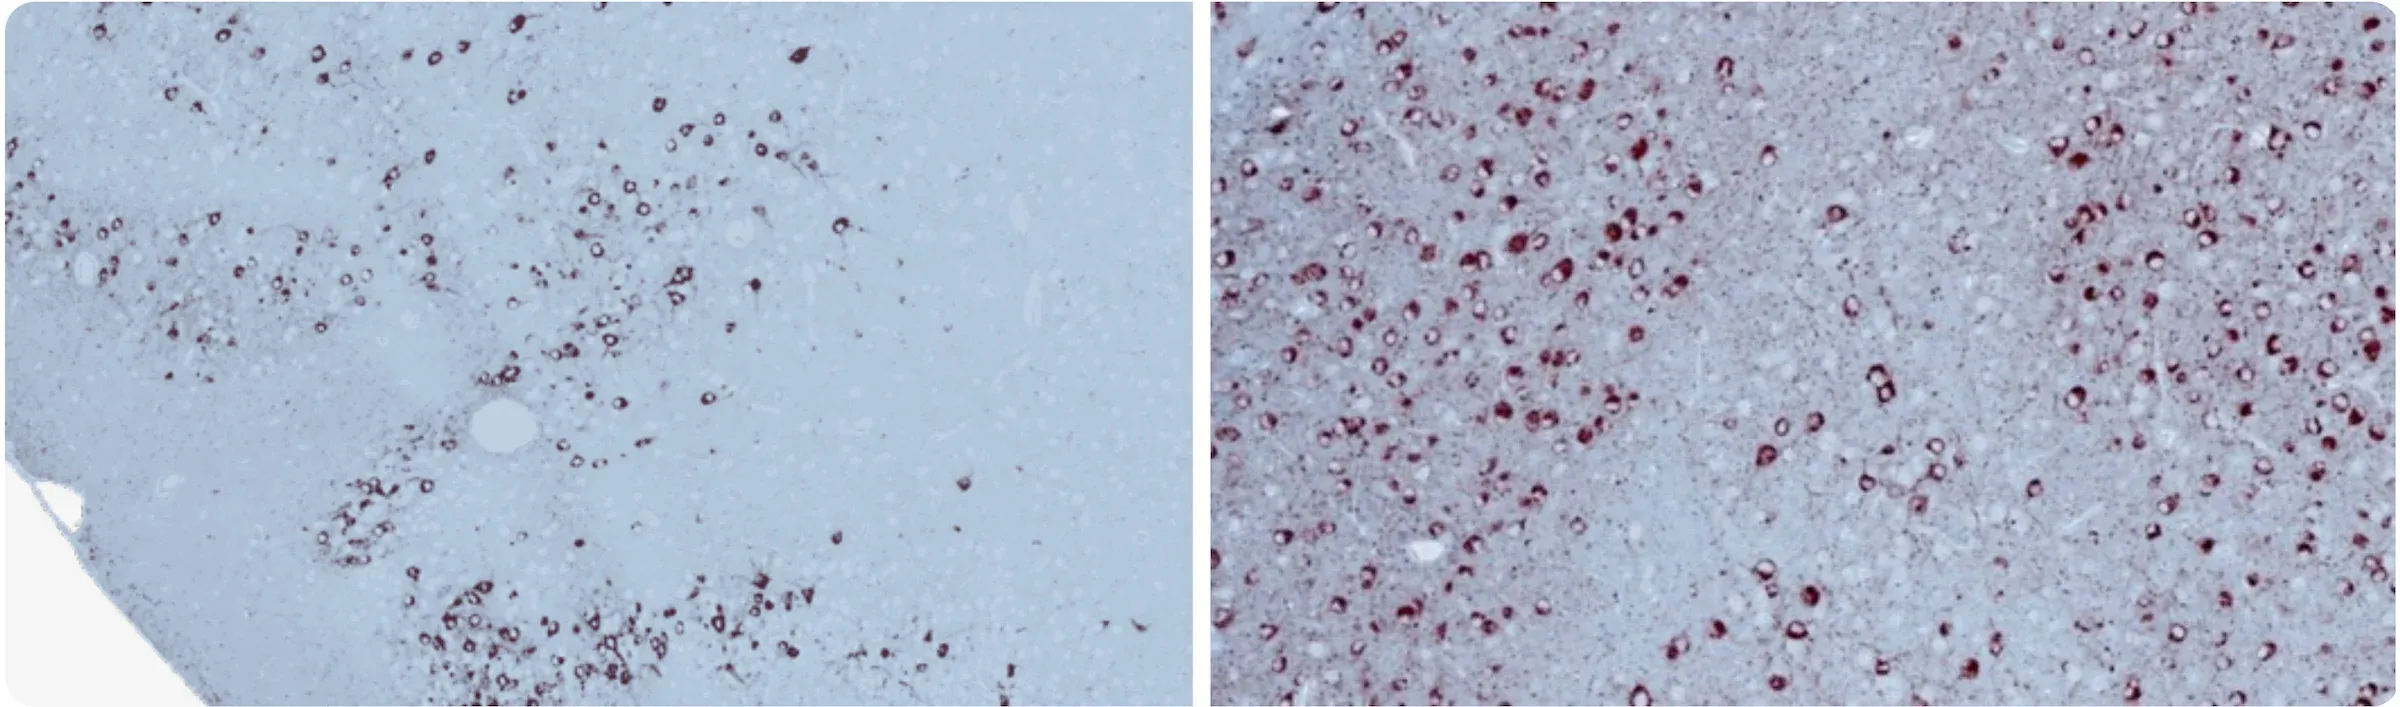 Two brain tissue sections stained to reveal tau protein, associated with Alzheimer's Disease (AD), highlighting differences in tau accumulation in the hippocampus (HC) and cortex (Ctx).